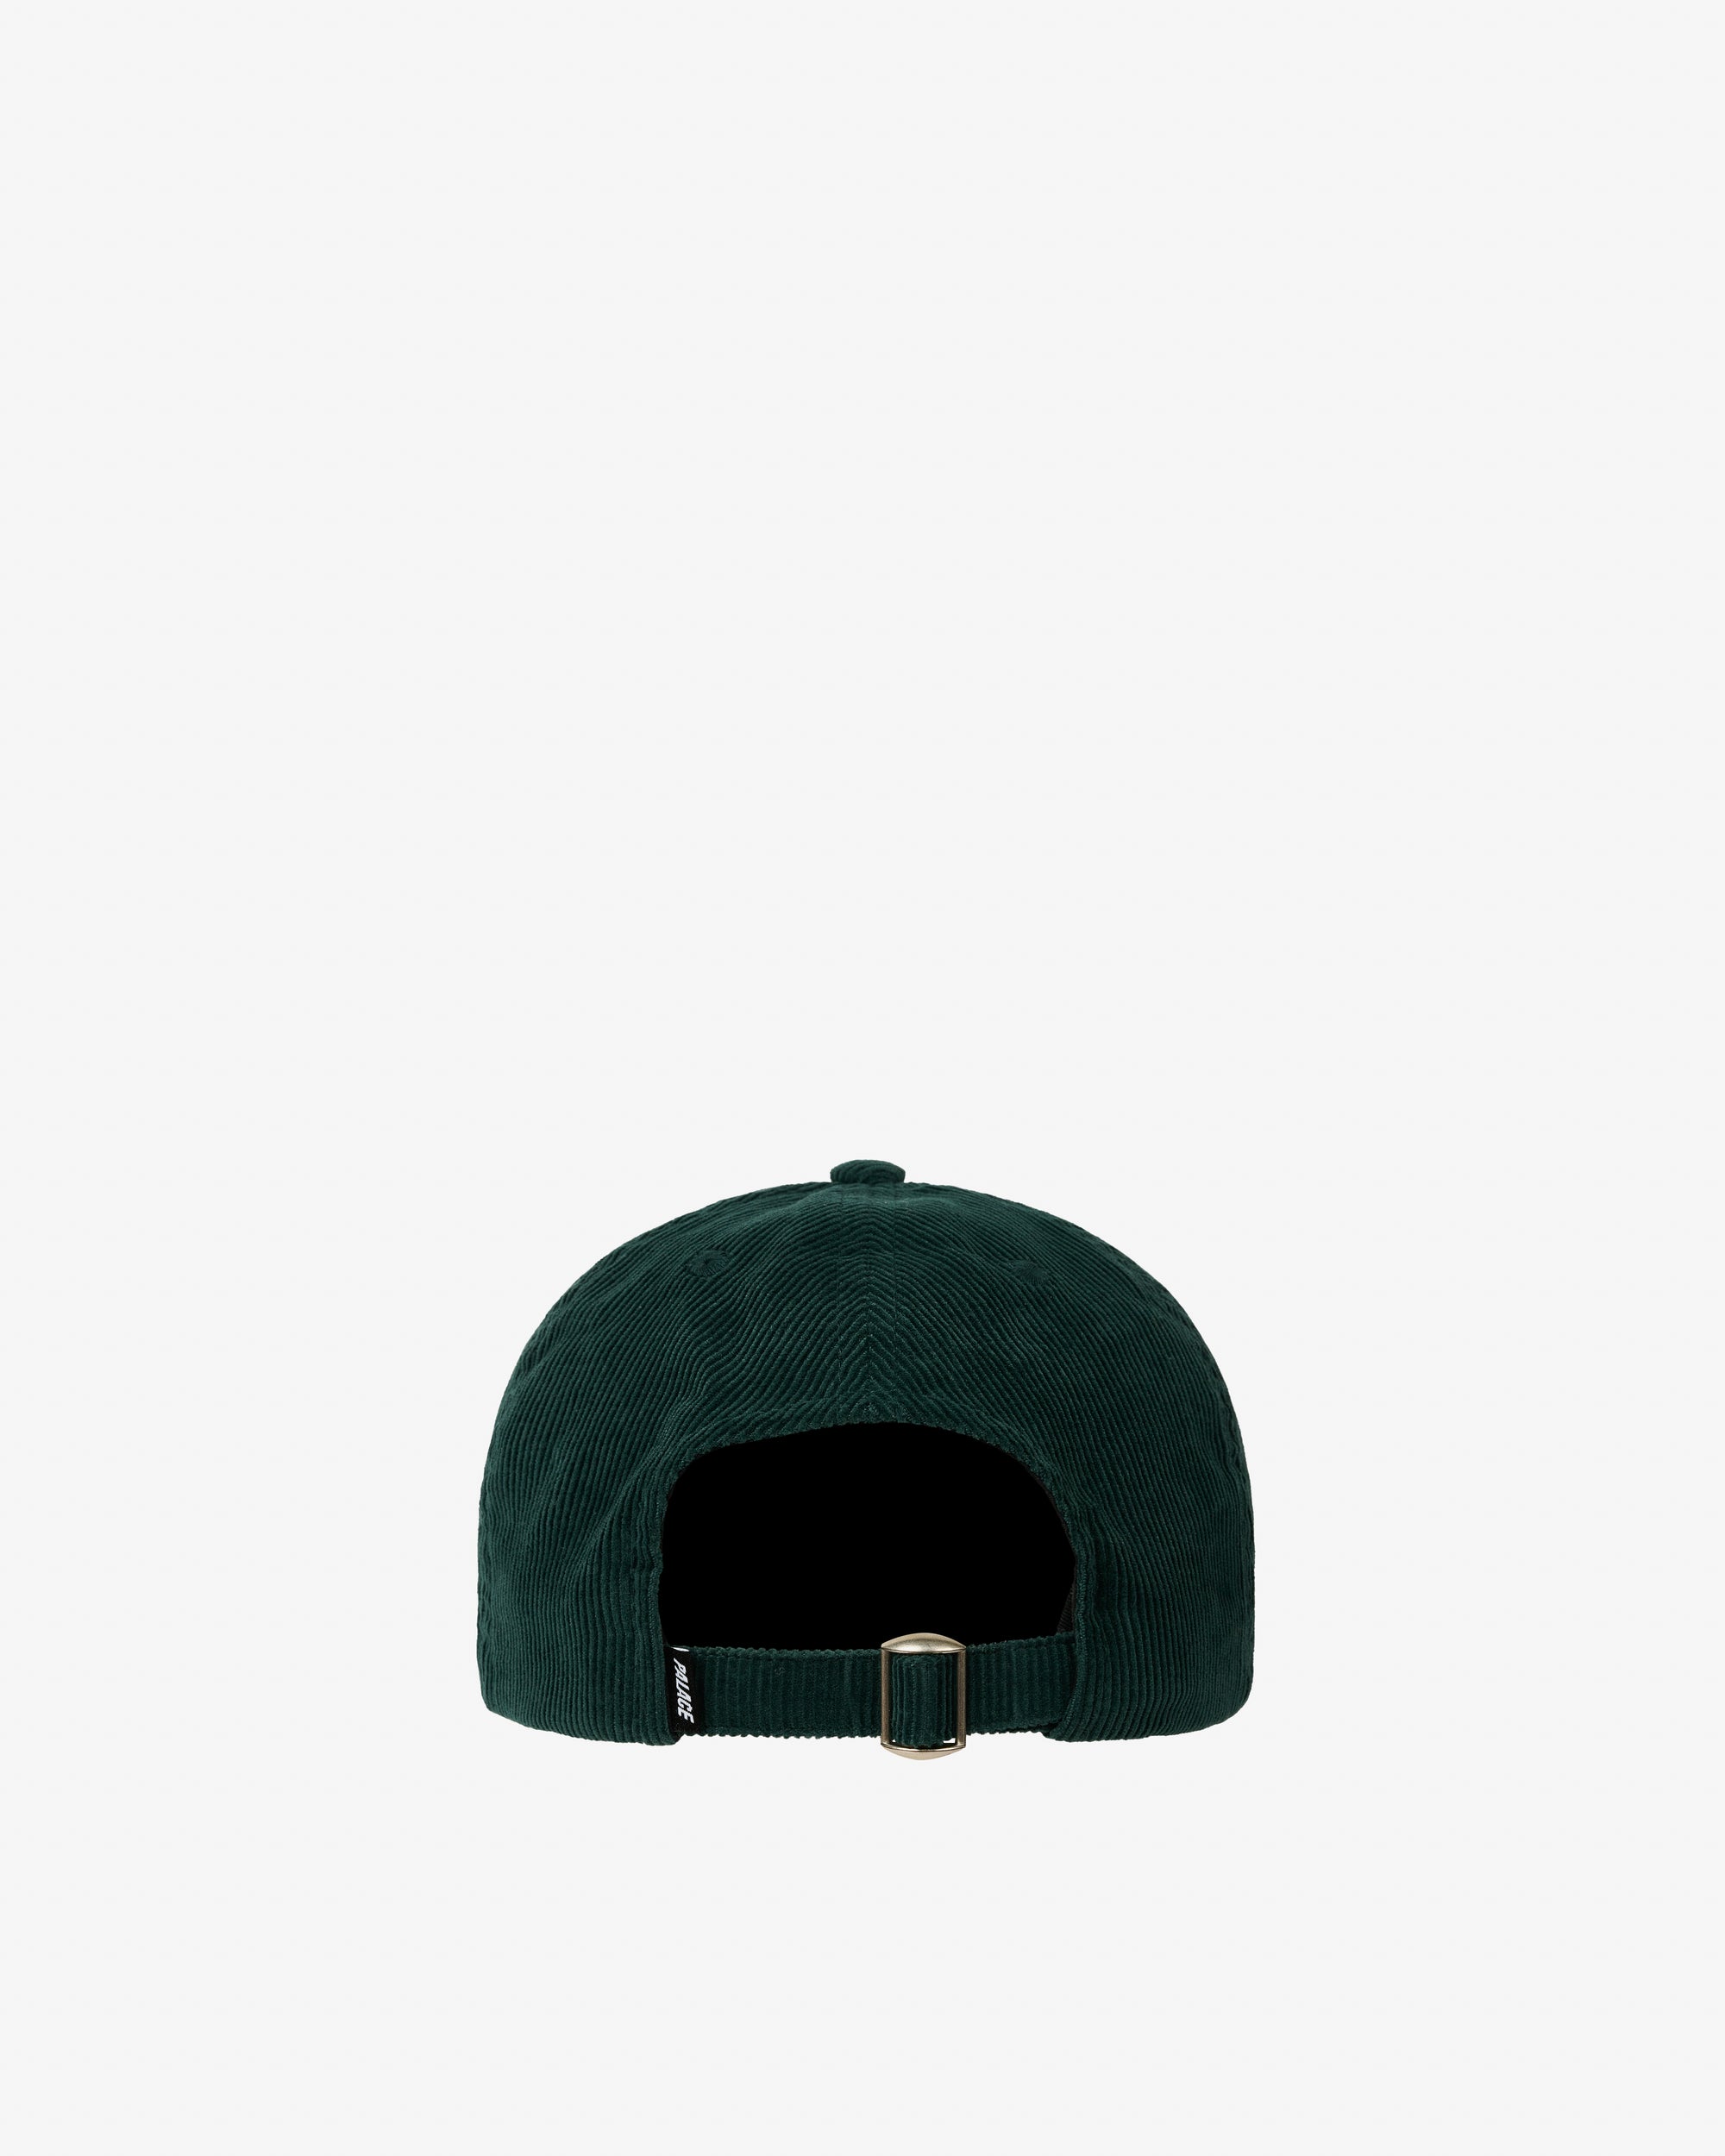 Palace - Men's Gassy 6-Panel - (Green) view 2